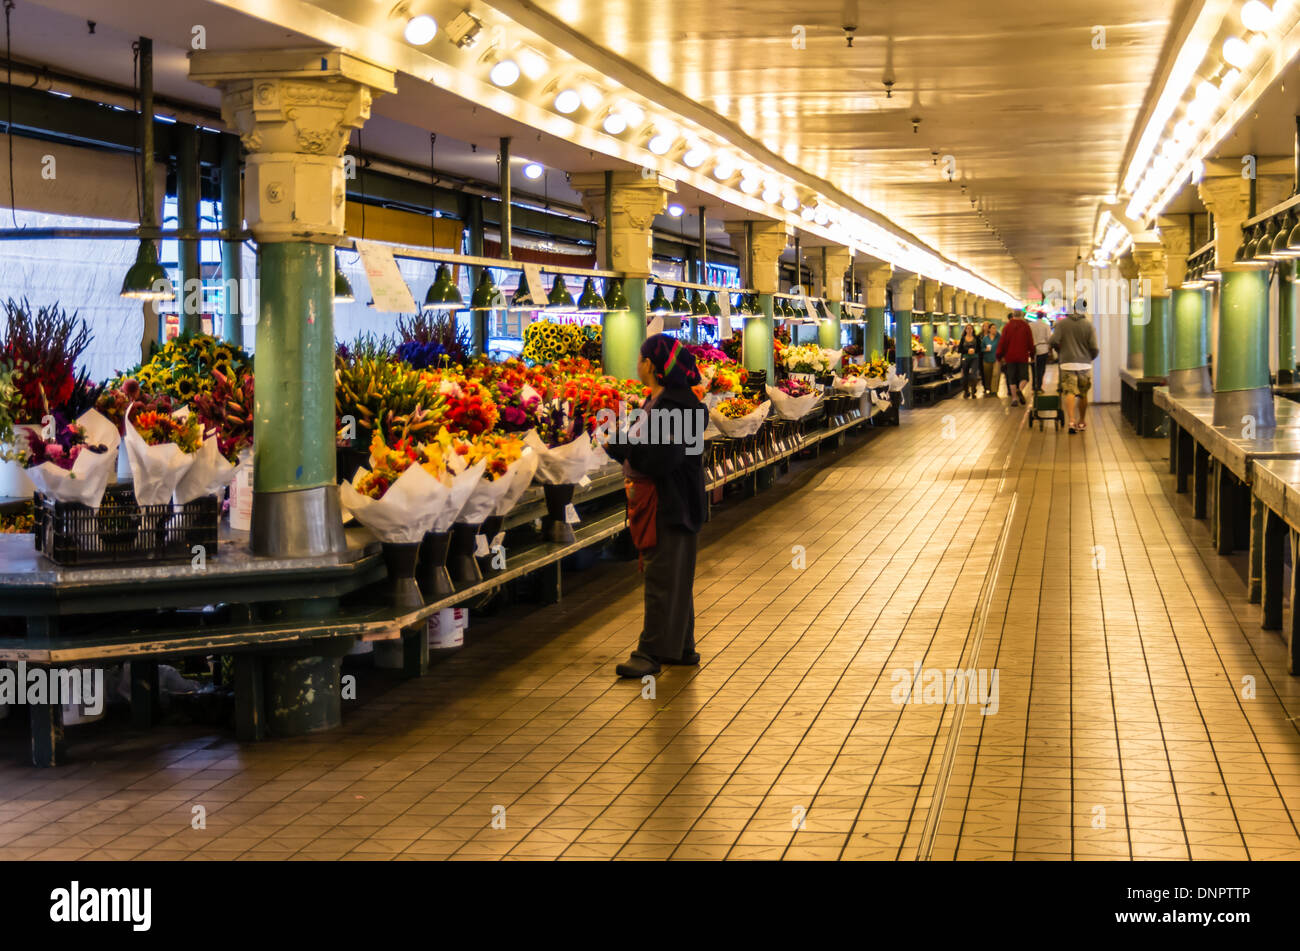 Flower vendor checks the display at a flower market stall Pike Place Market Seattle, Washington, USA Stock Photo